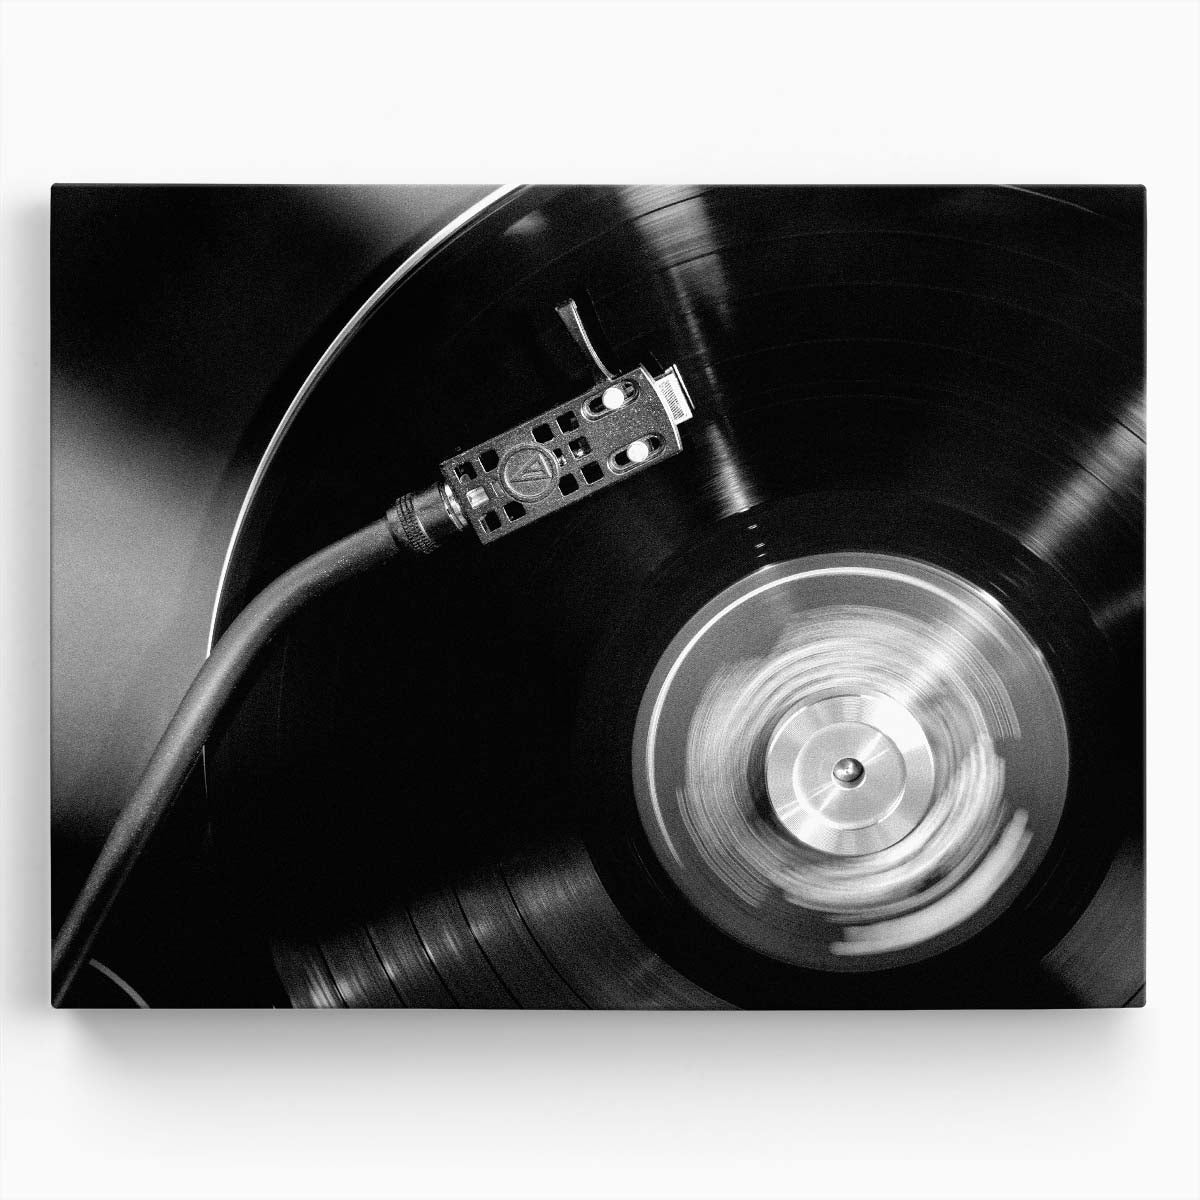 Vintage Vinyl Record Black and White Photography Wall Art Wall Art by Luxuriance Designs. Made in USA.